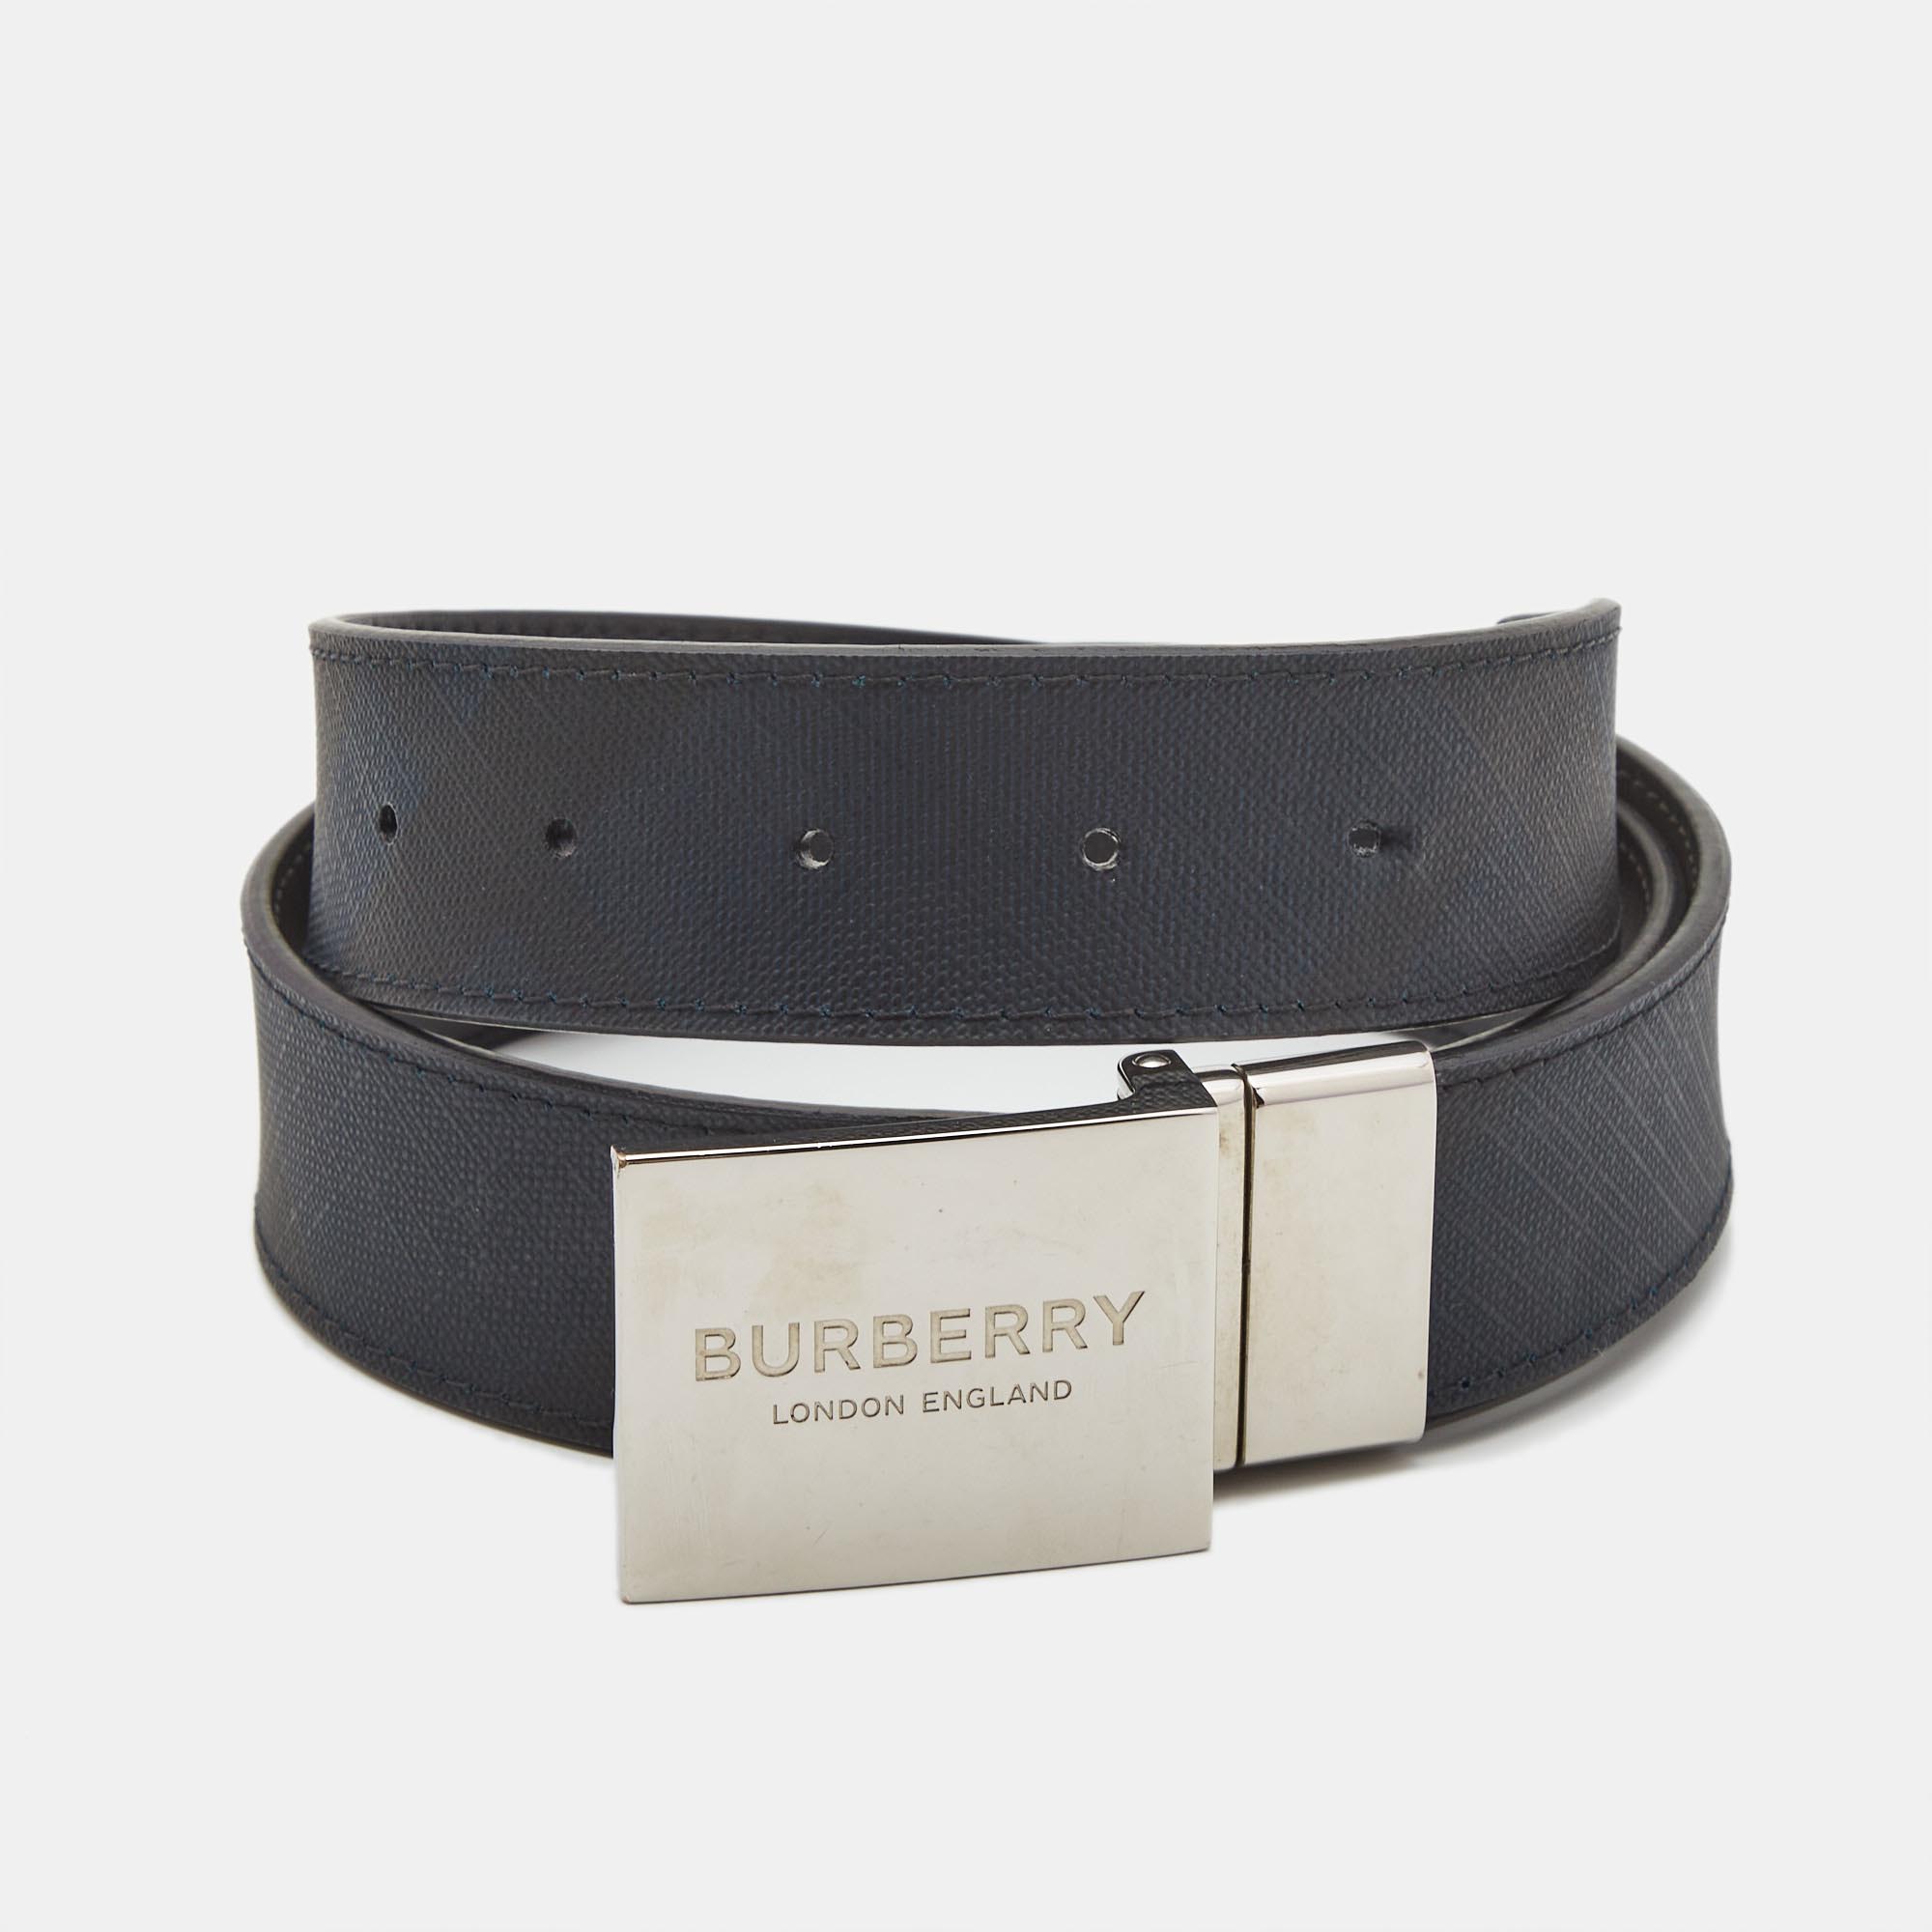 Burberry navy blue check coated canvas and leather logo plague reversible belt 85cm